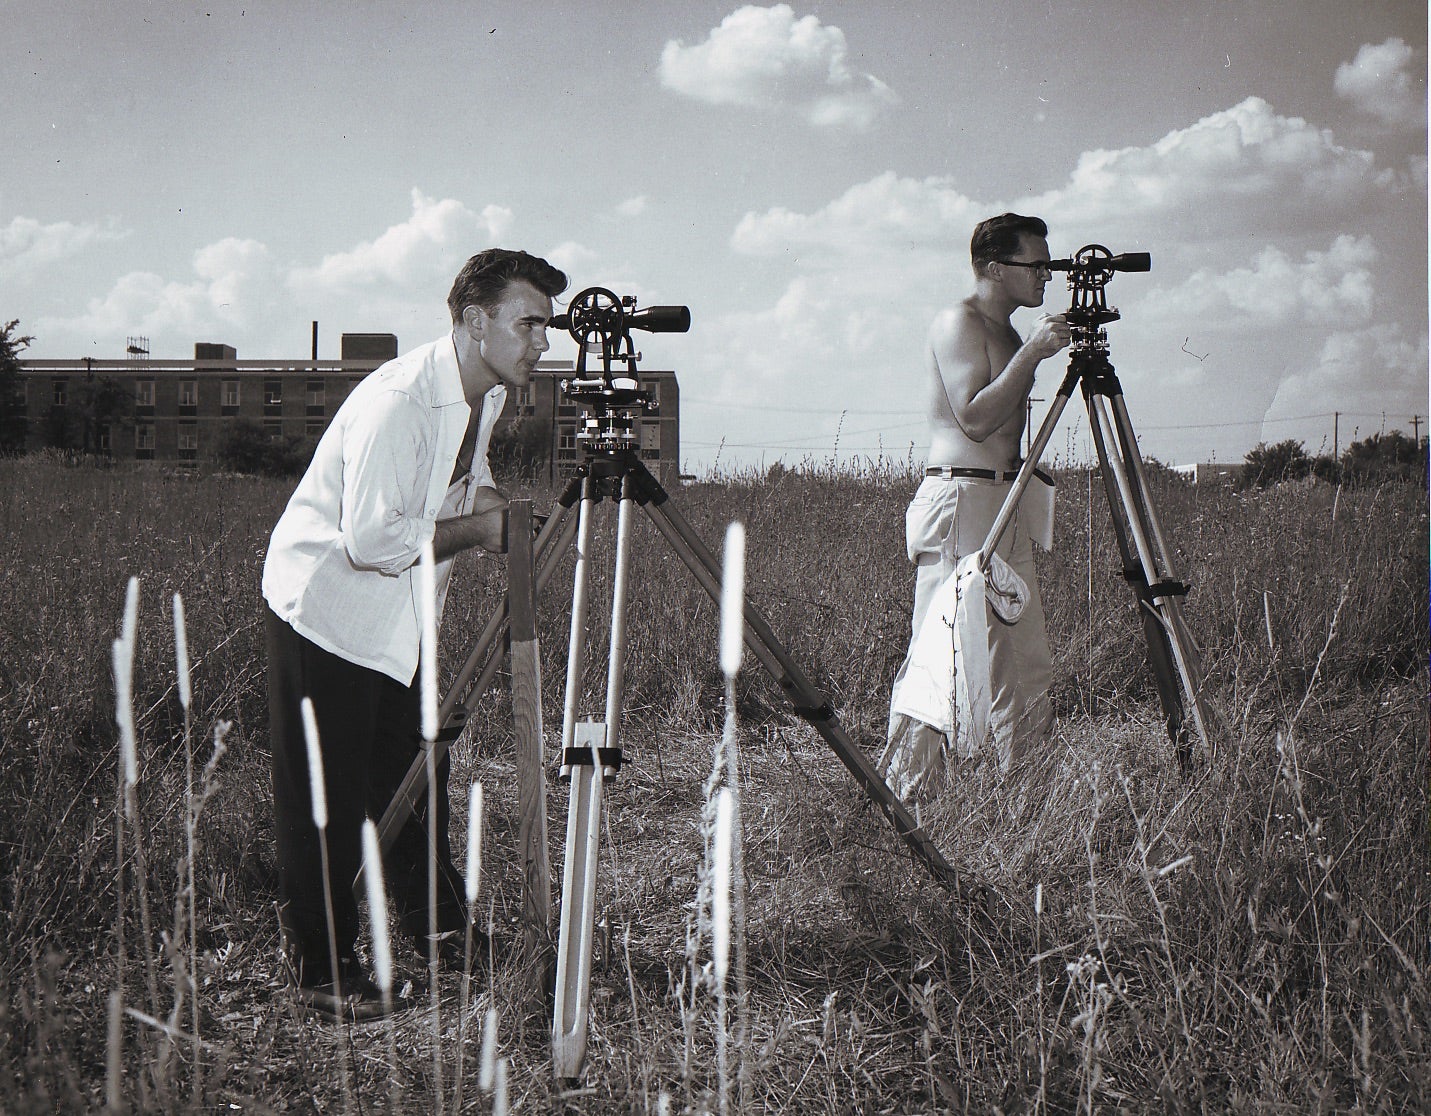 Engineers using sextant's to survey land.  